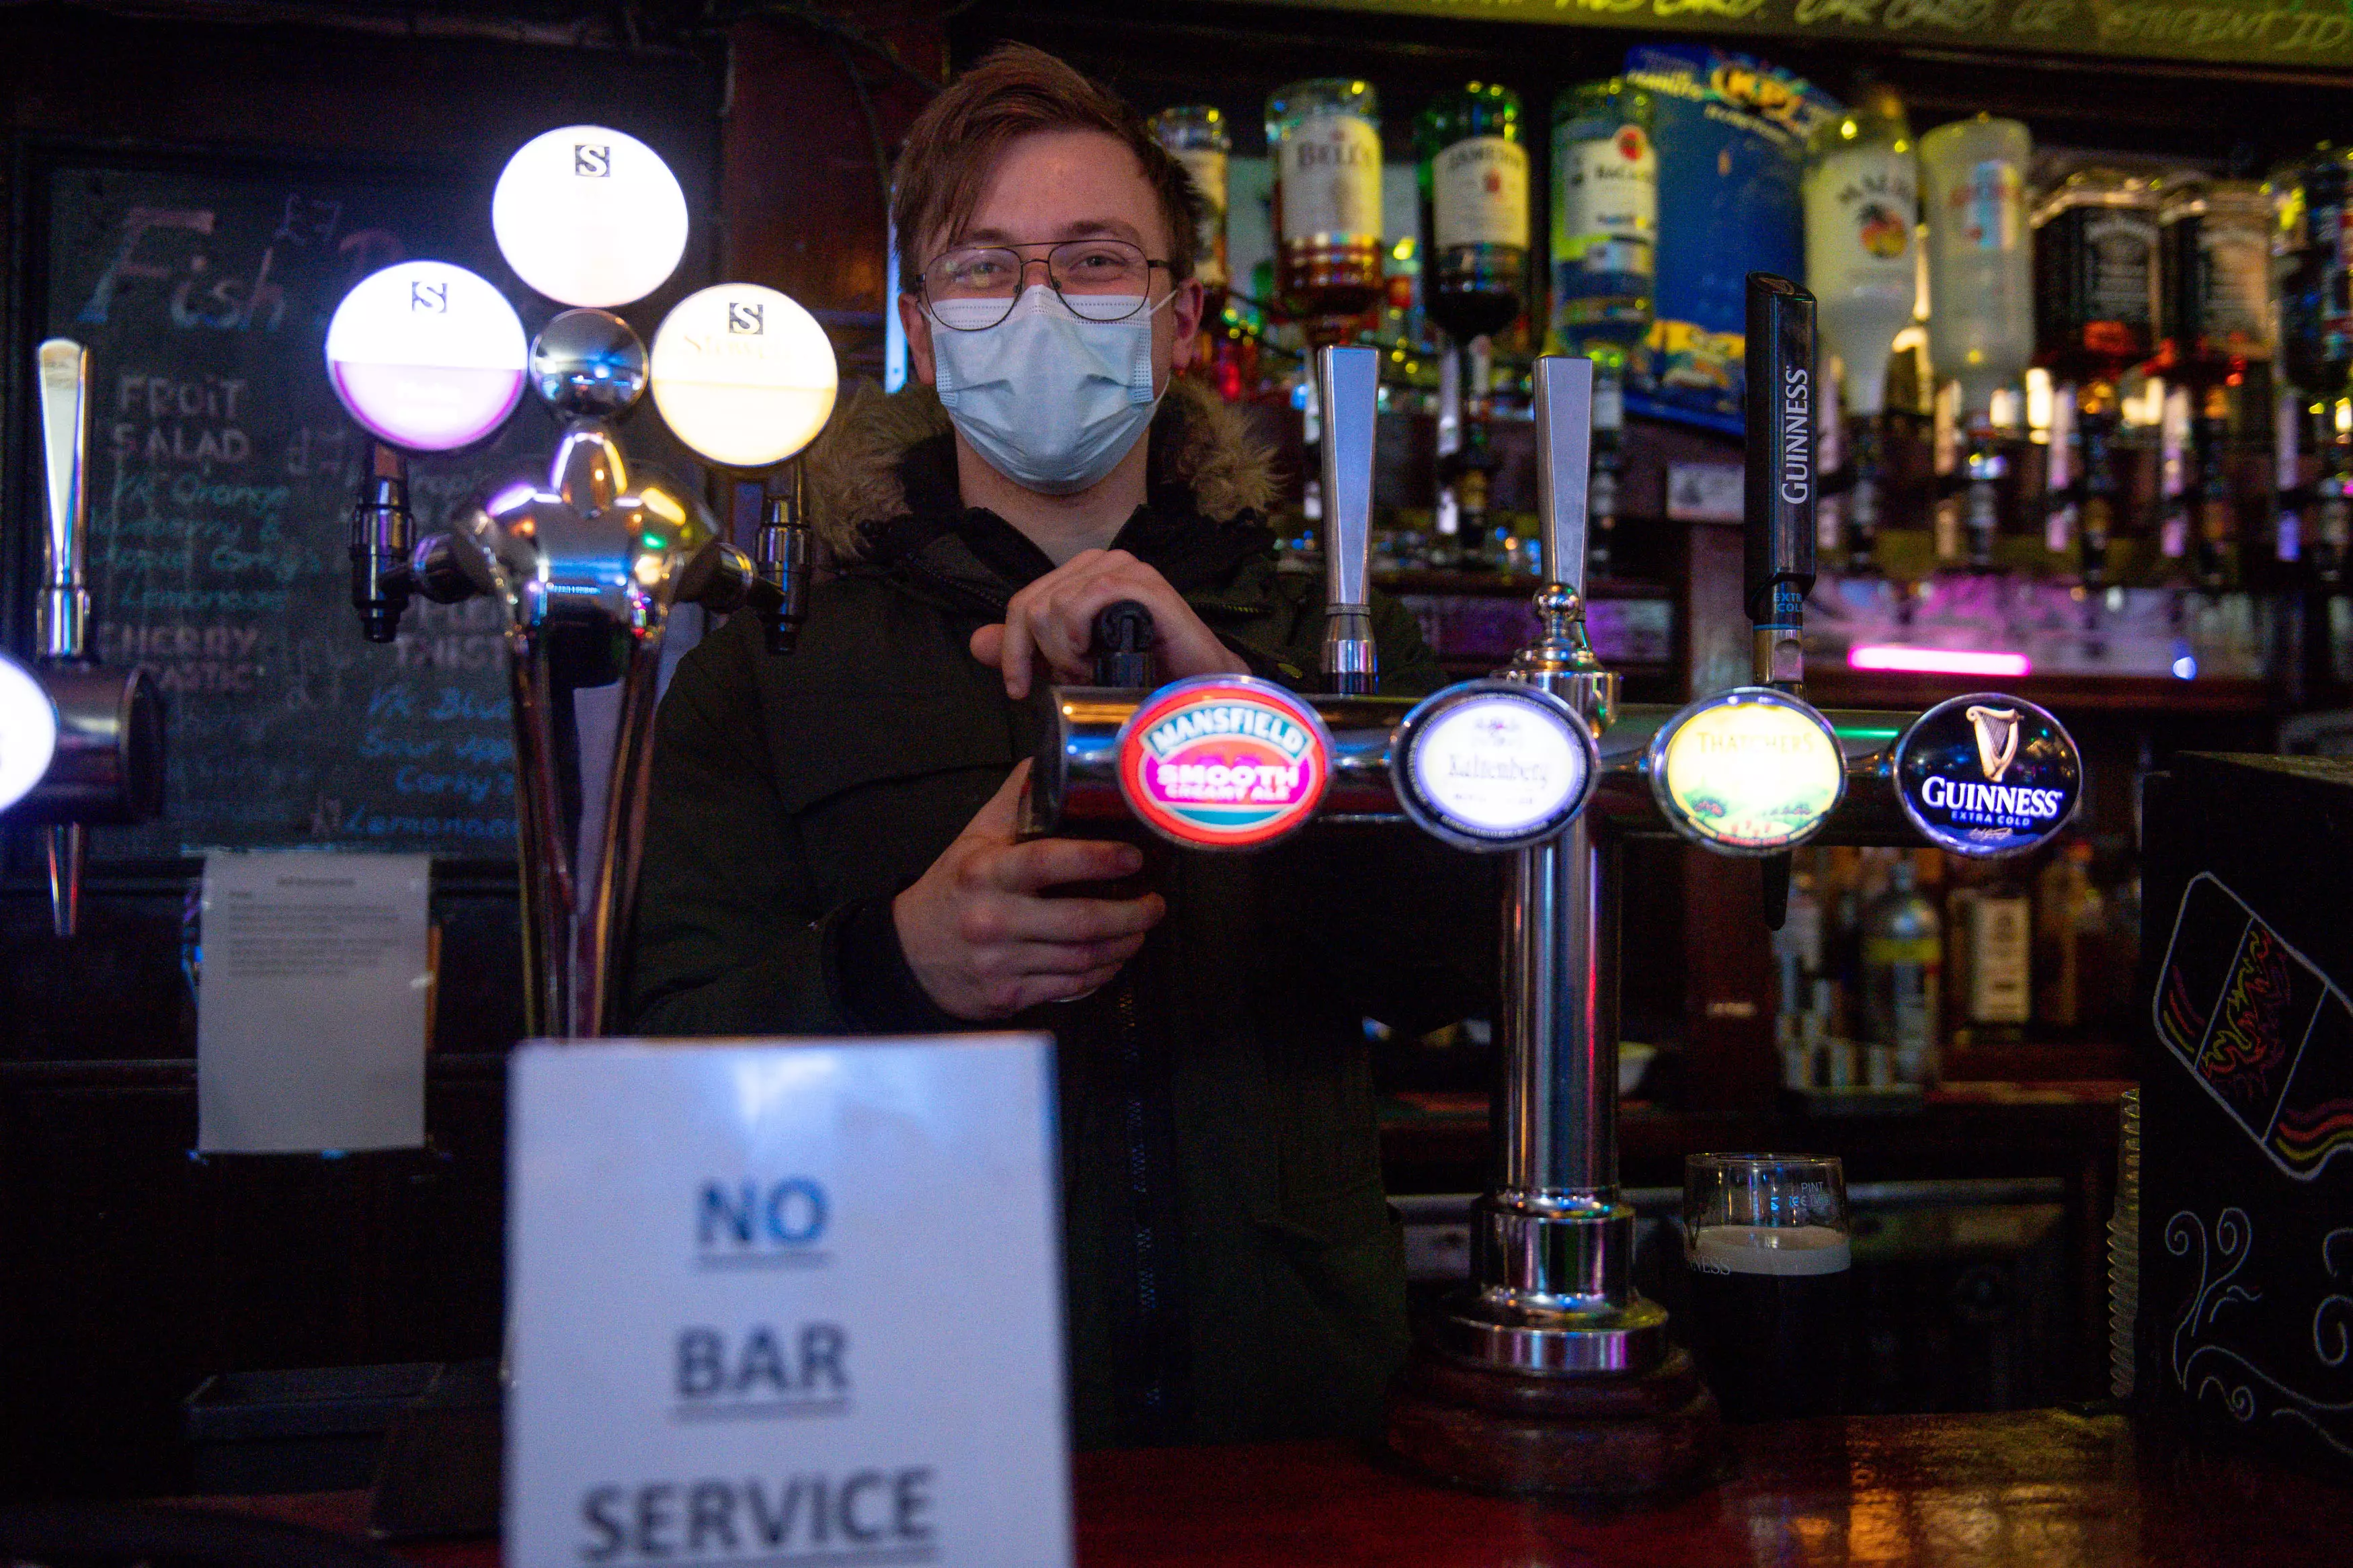 Service at bars has been banned since March 2020.